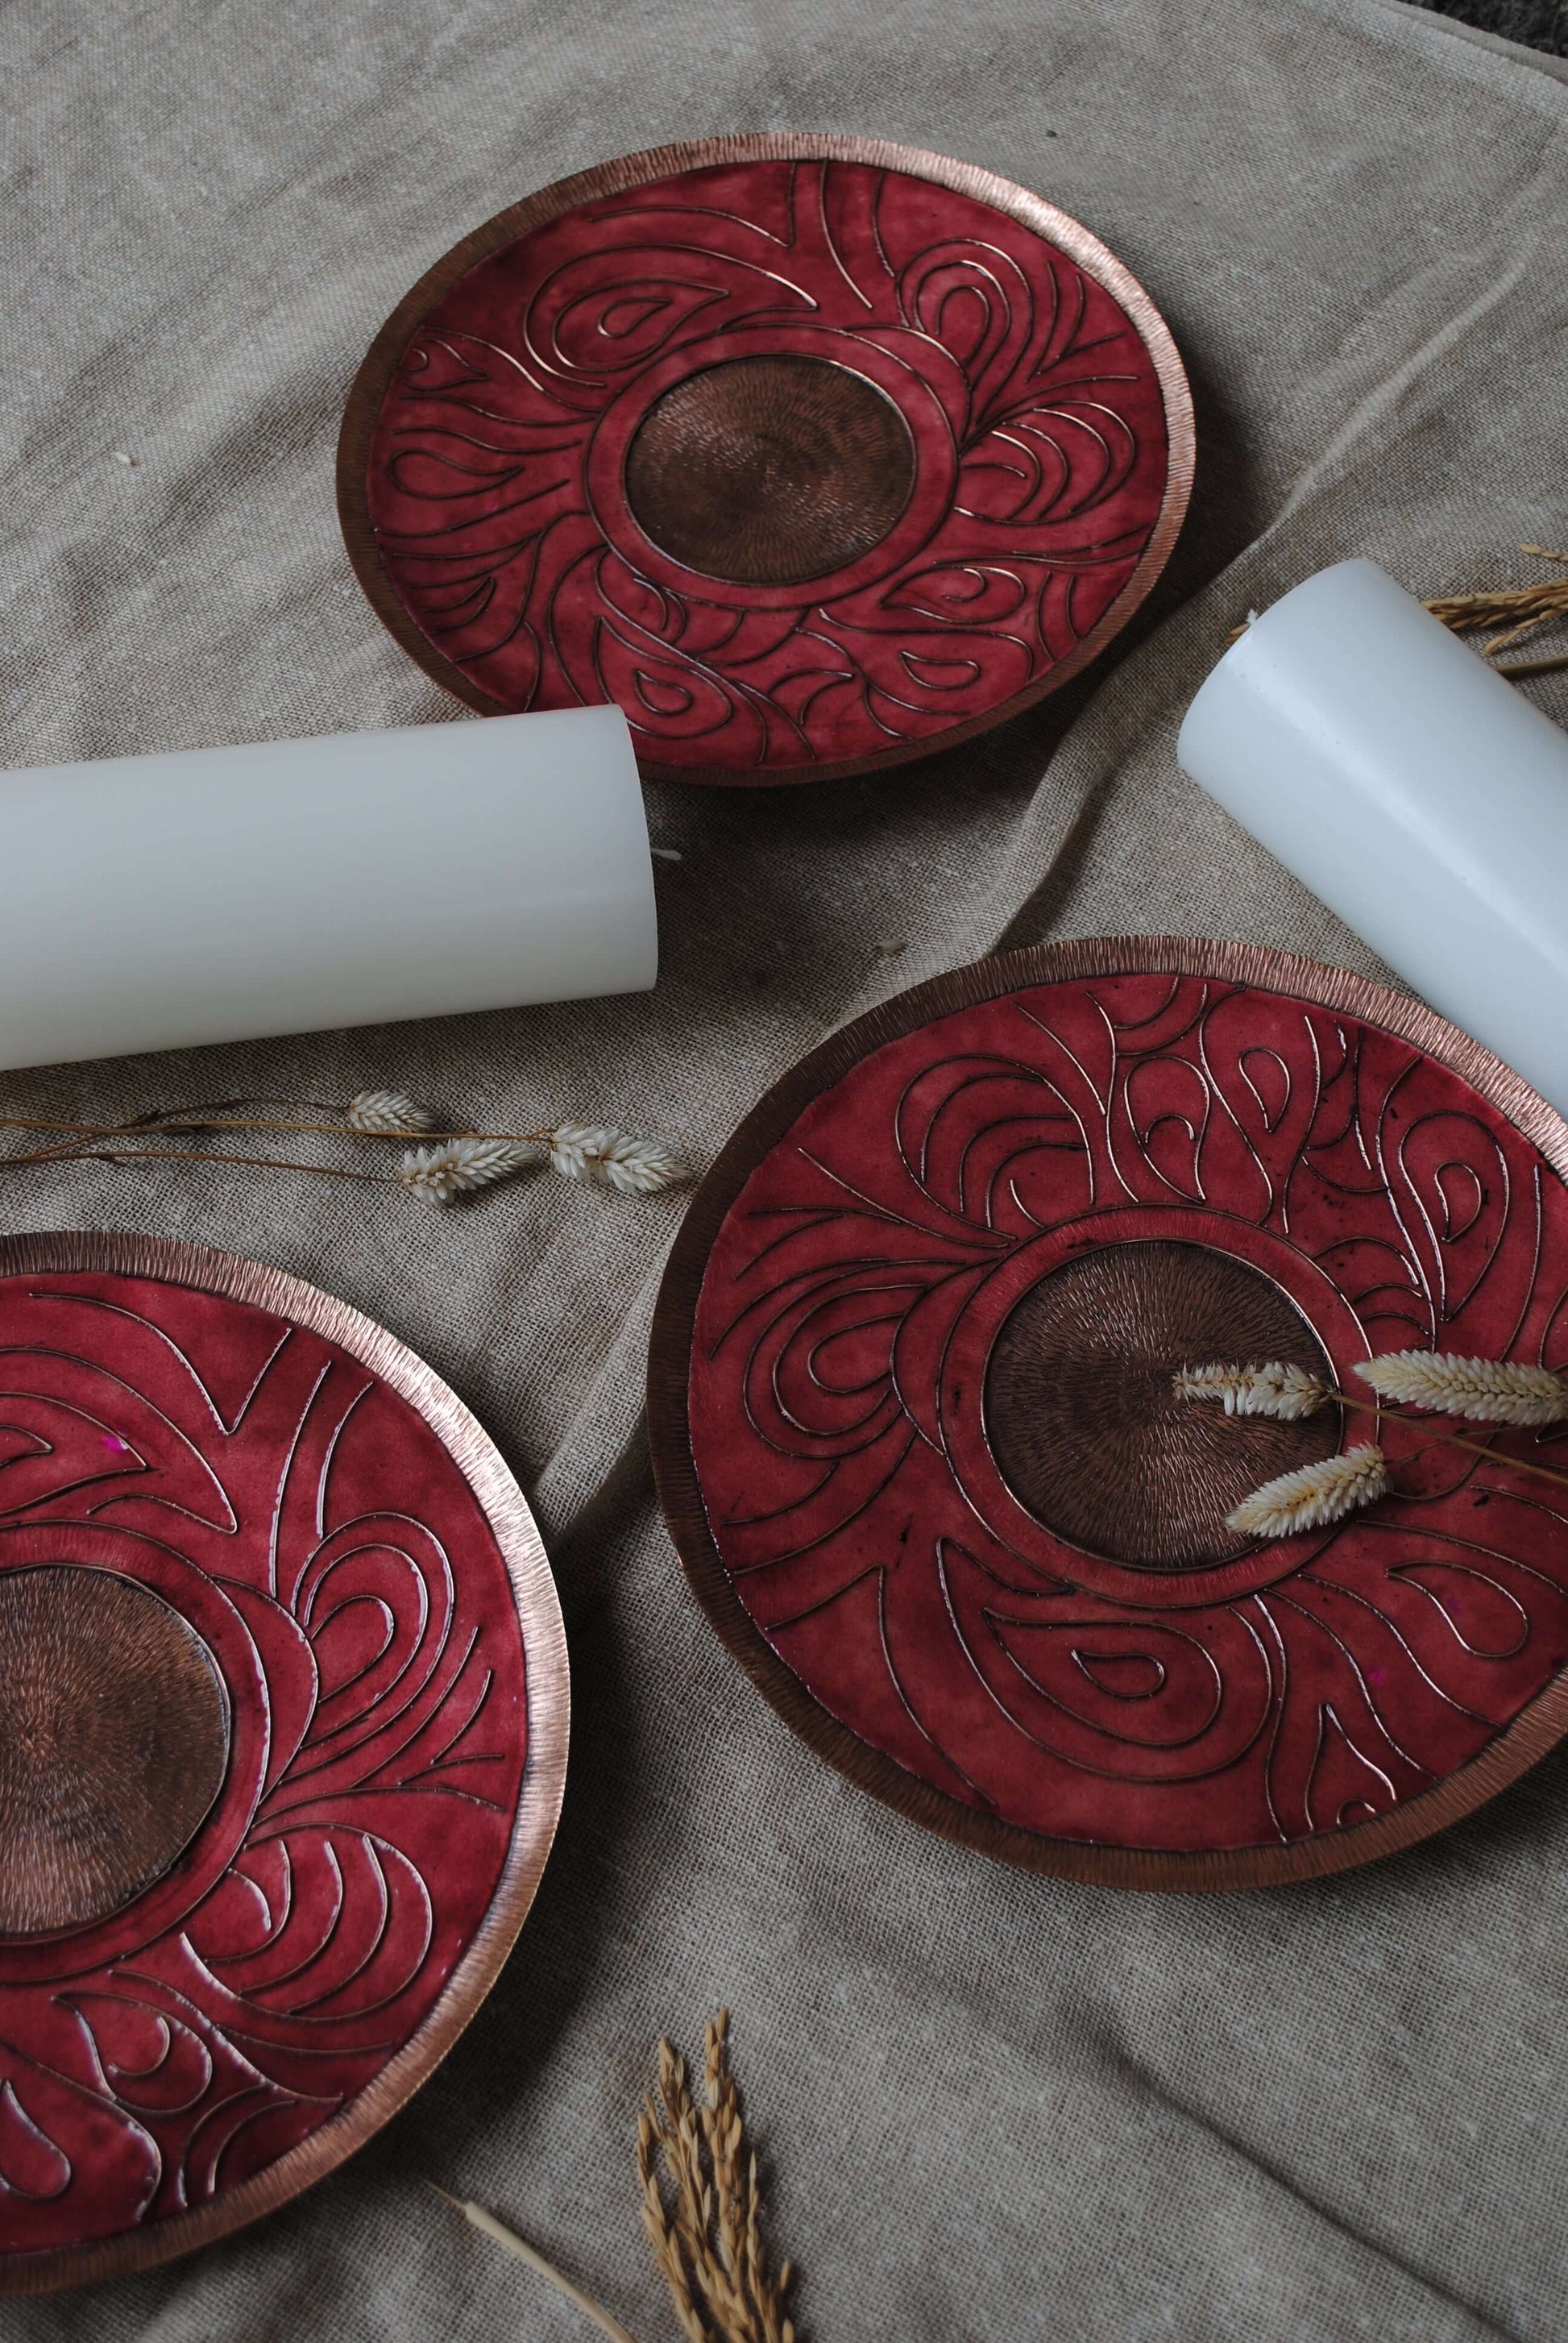 Home decor copper enamel wall plates and candle holder Lakhire range of bold, simple designs. Handcrafted by artisans in Maharashtra